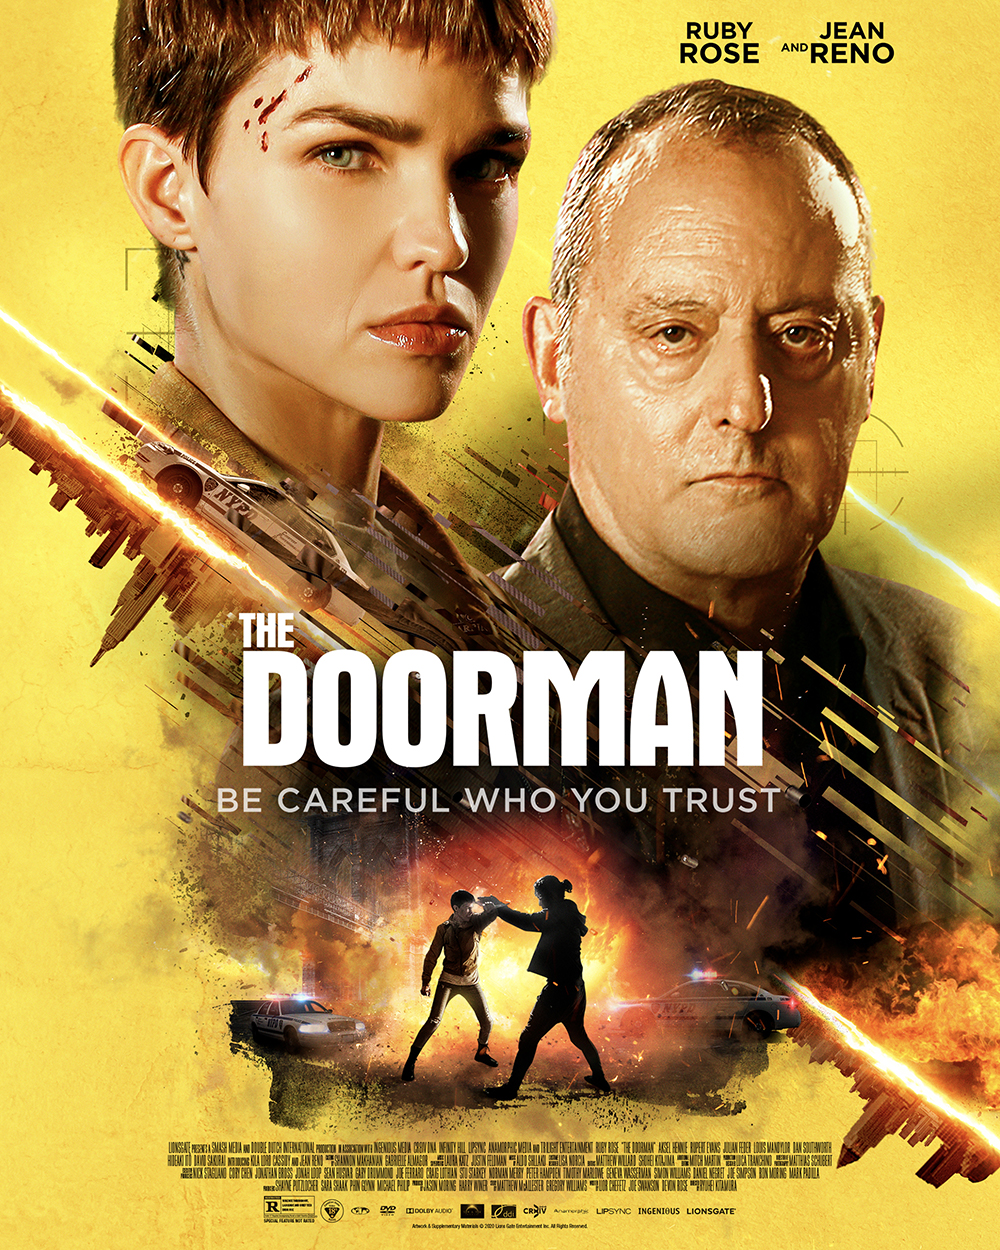 The Doorman - Ruby Rose and Jean Reno